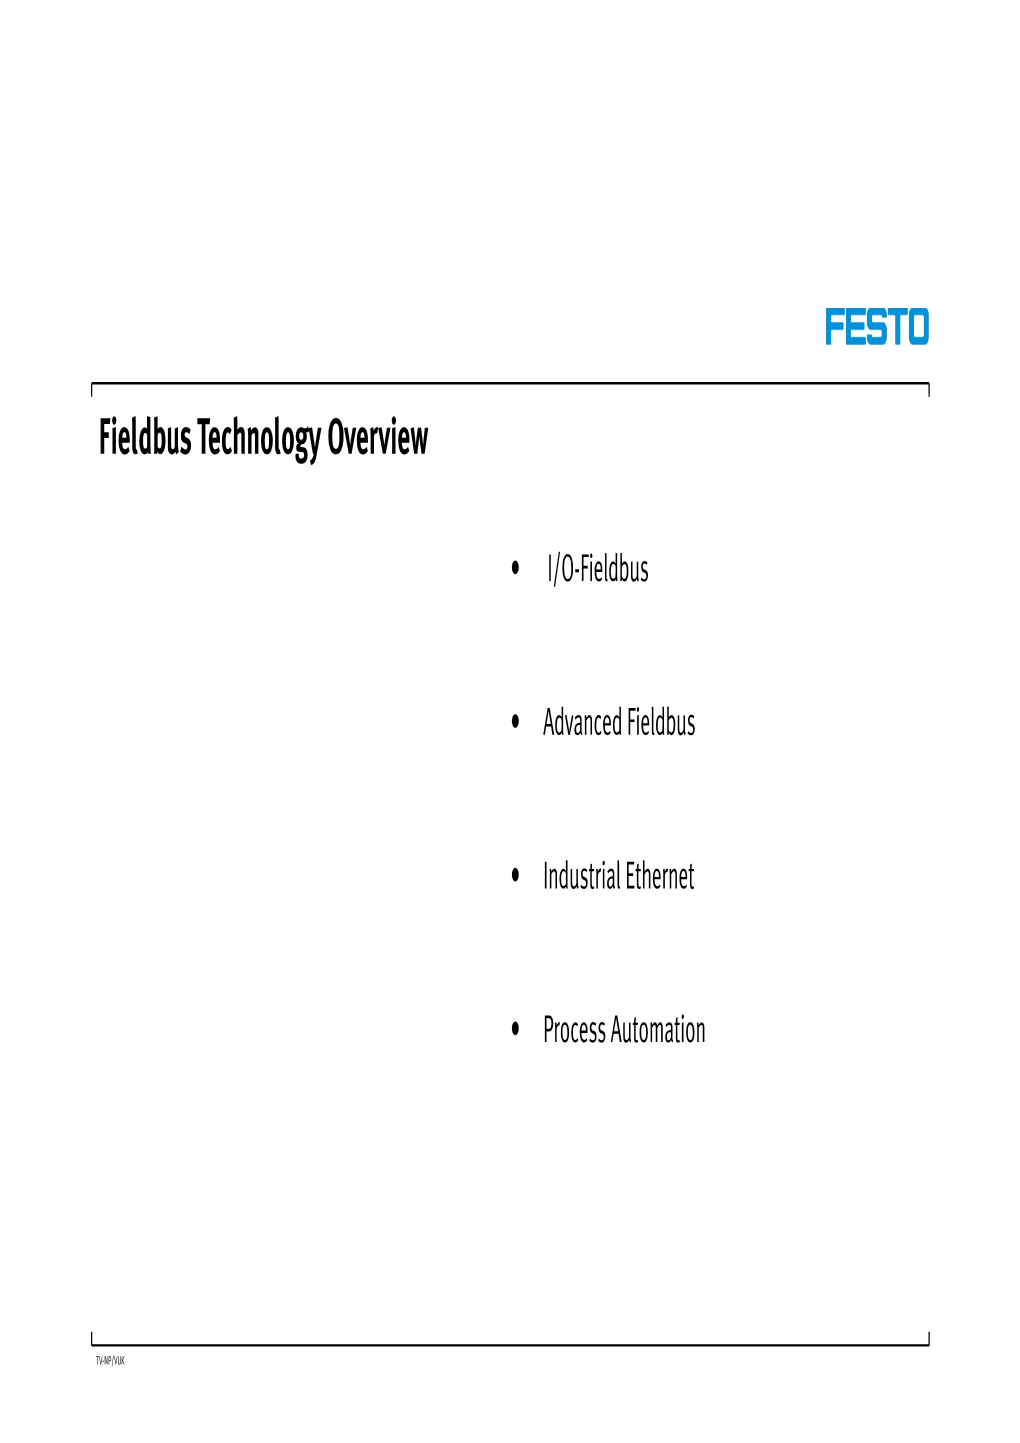 Fieldbus Technology Overview